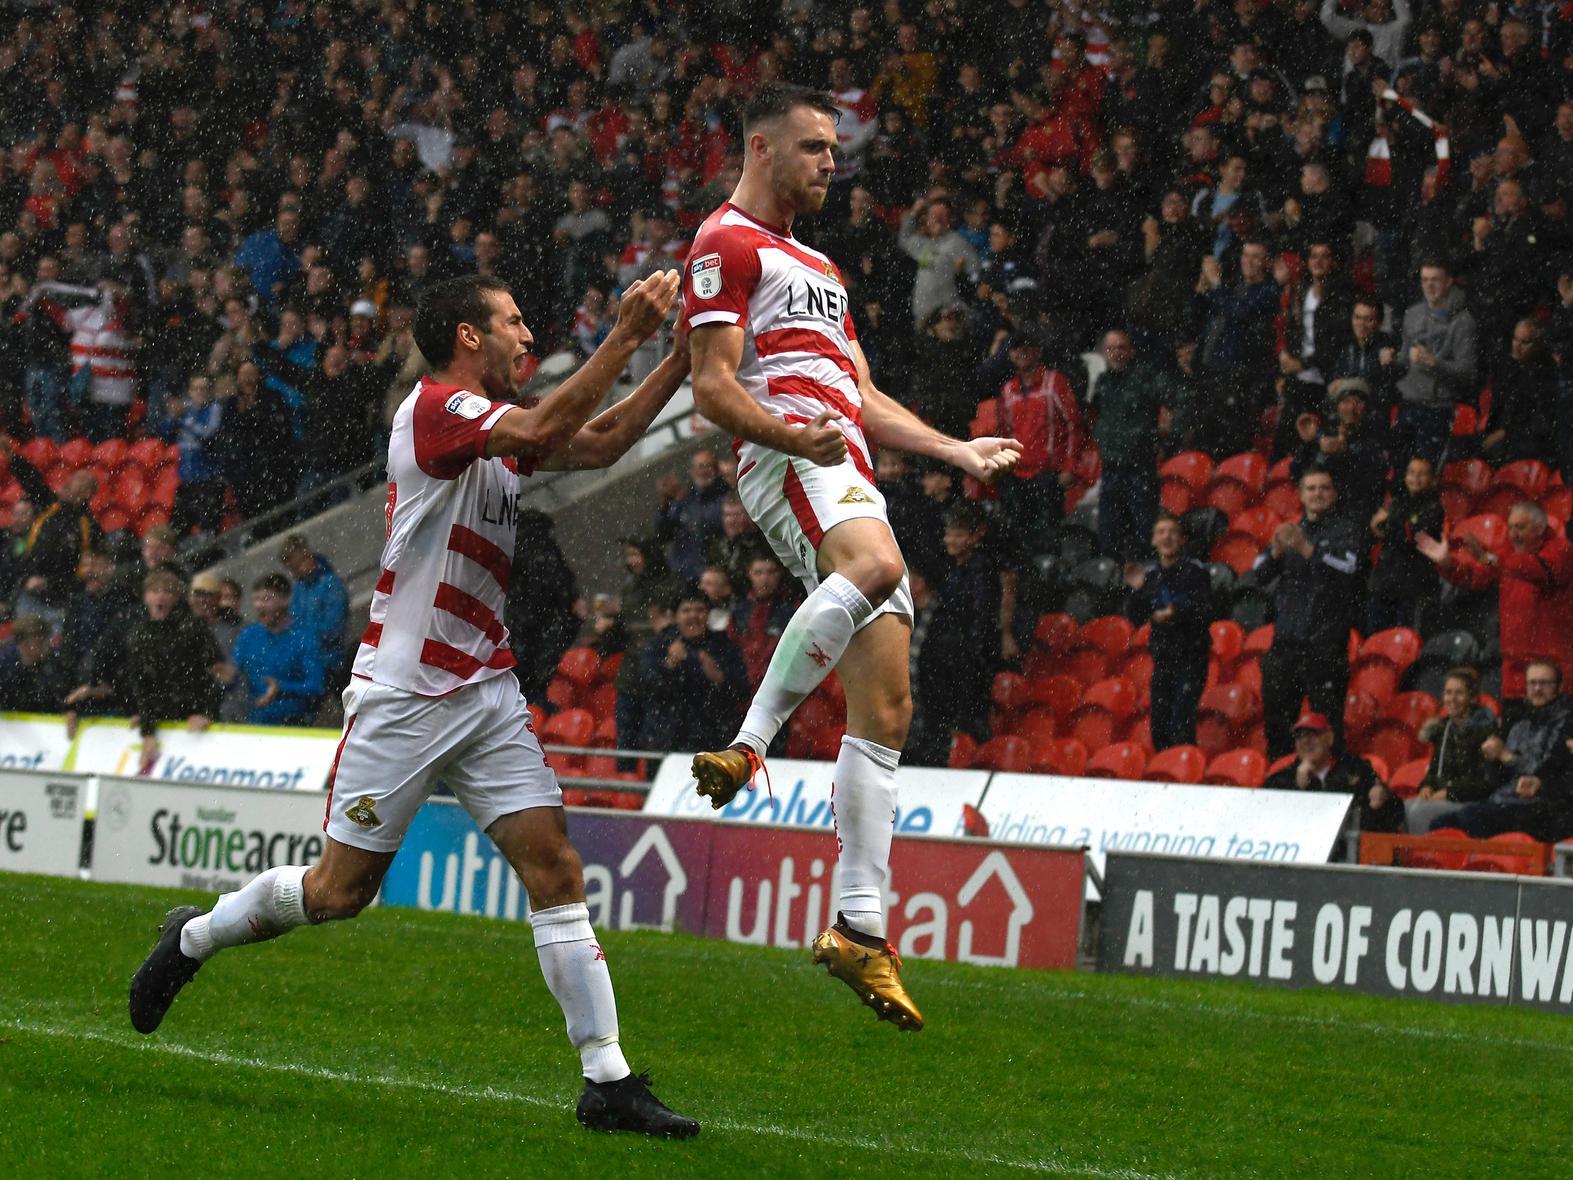 Derby County look set to be frustrated in their pursuit of Doncaster Rovers midfielder Ben Whiteman, as the League One outfit are said to have no interest in selling their star. (Doncaster Free Press)